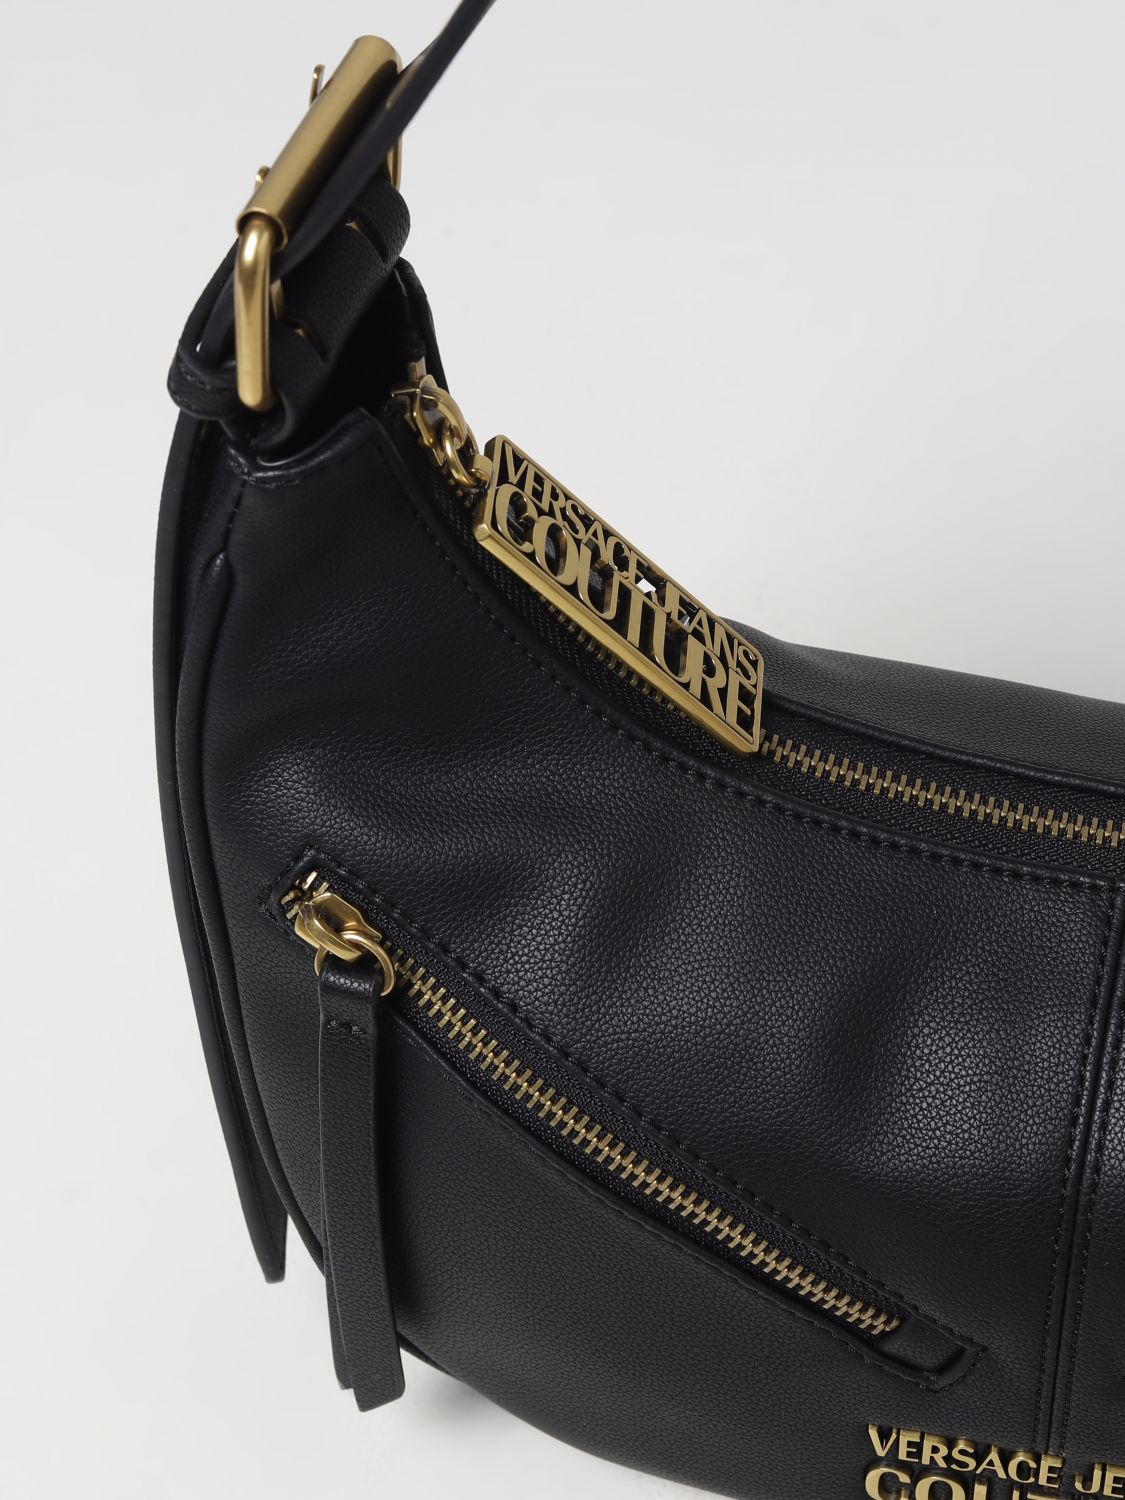 VERSACE JEANS COUTURE: bag in hammered synthetic leather - Orchid  Versace  Jeans Couture crossbody bags 75VA4BG1ZS413 online at